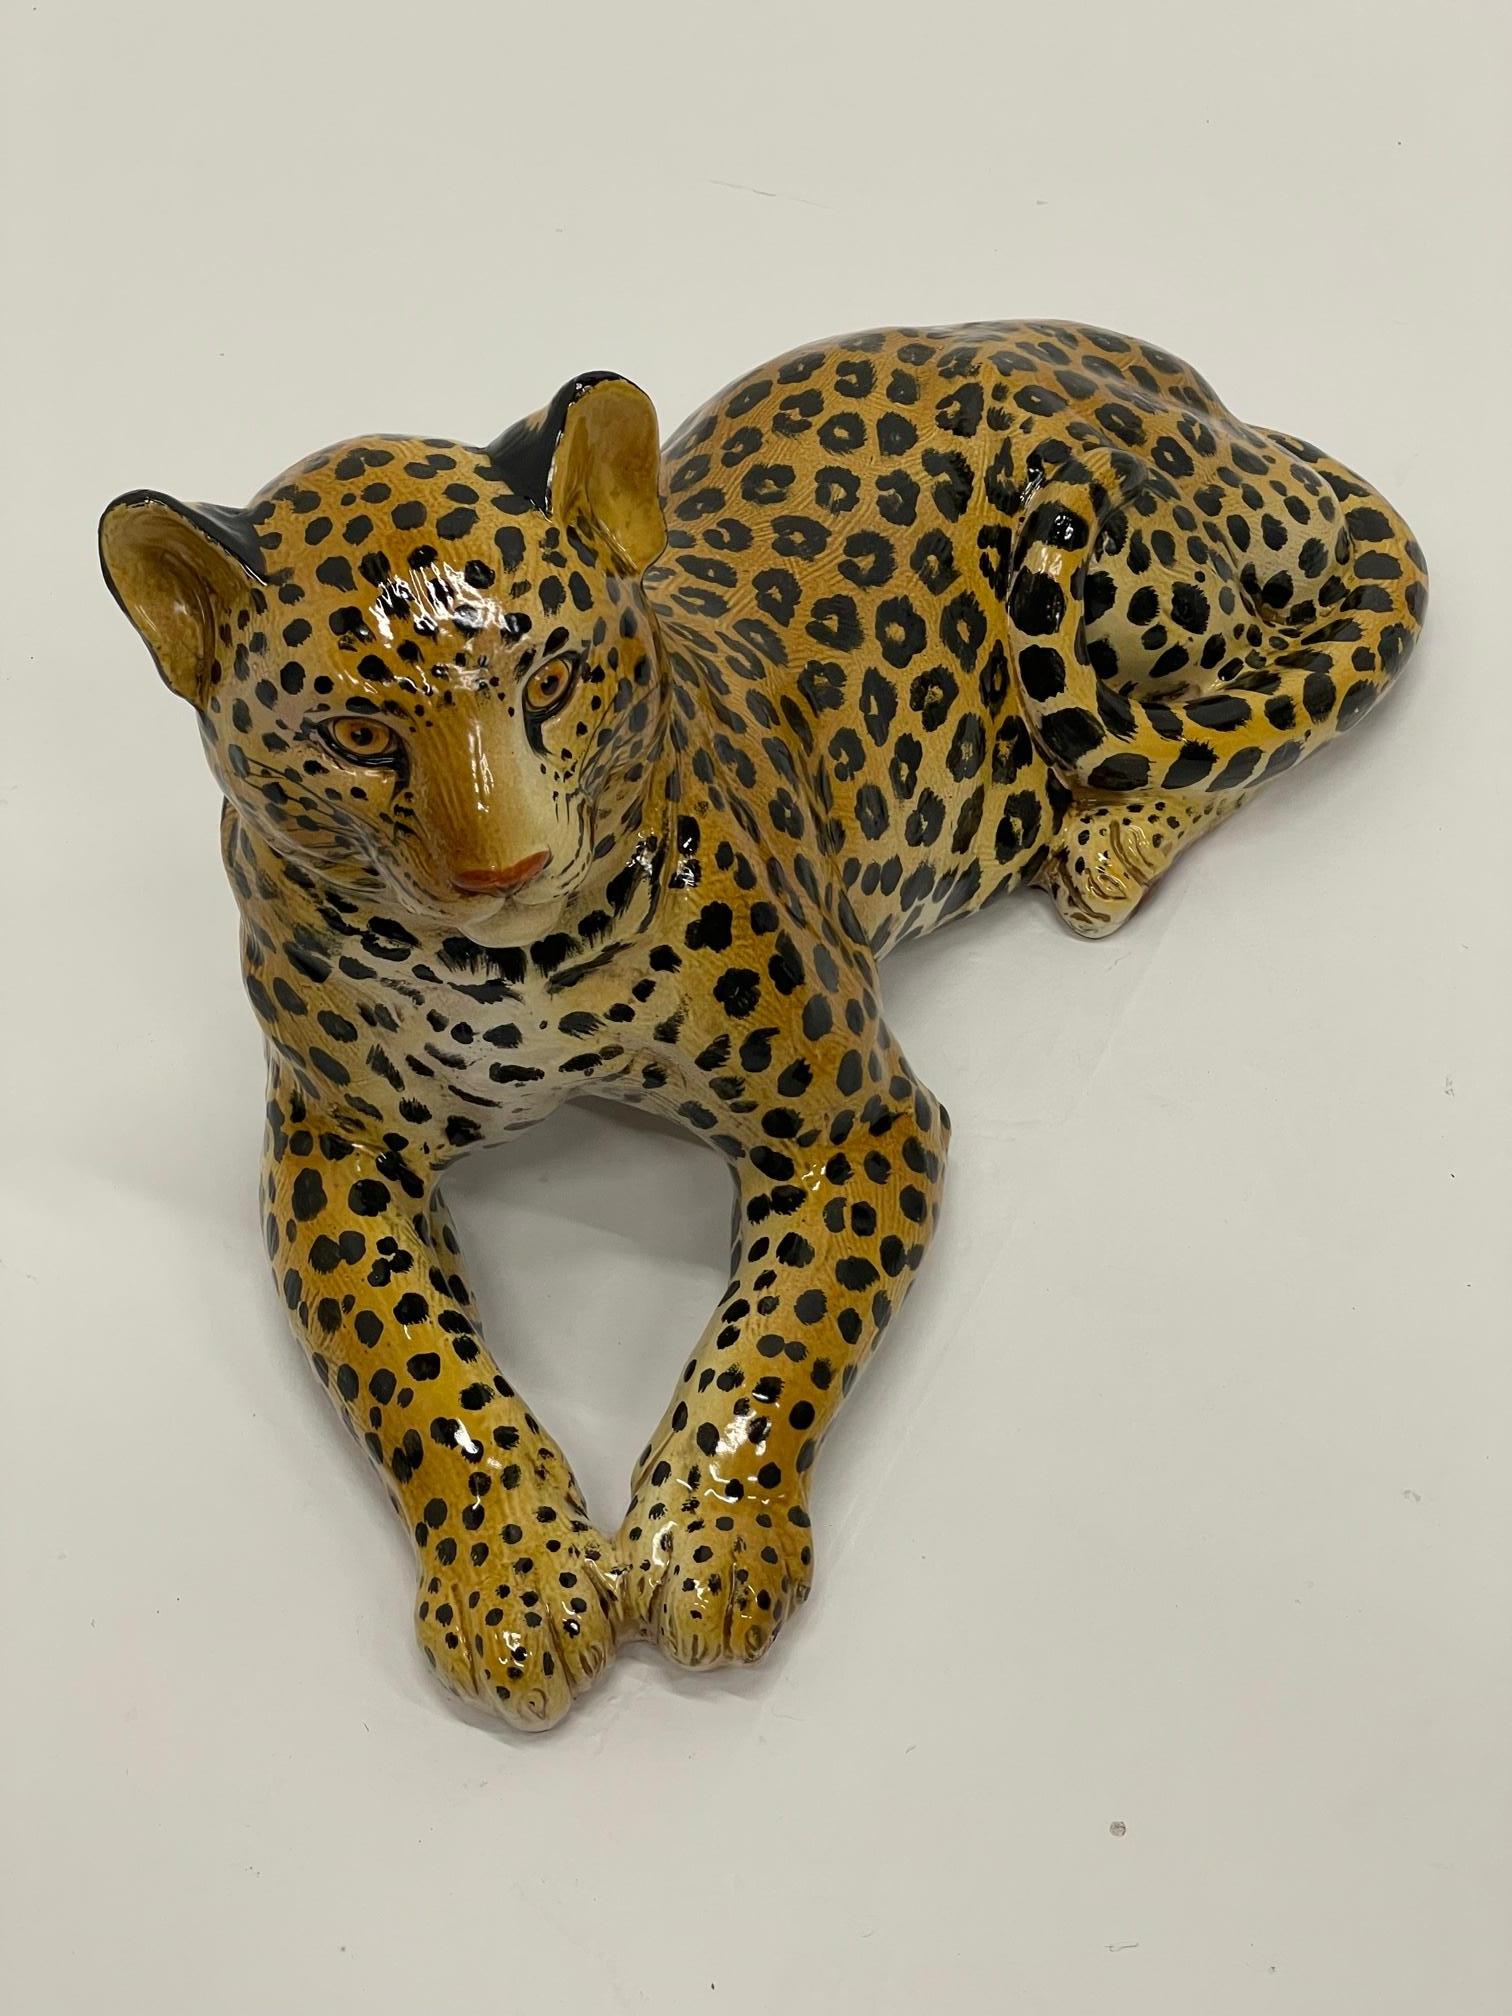 Large and striking hand painted Italian glazed terracotta sculpture of a leopard in repose.